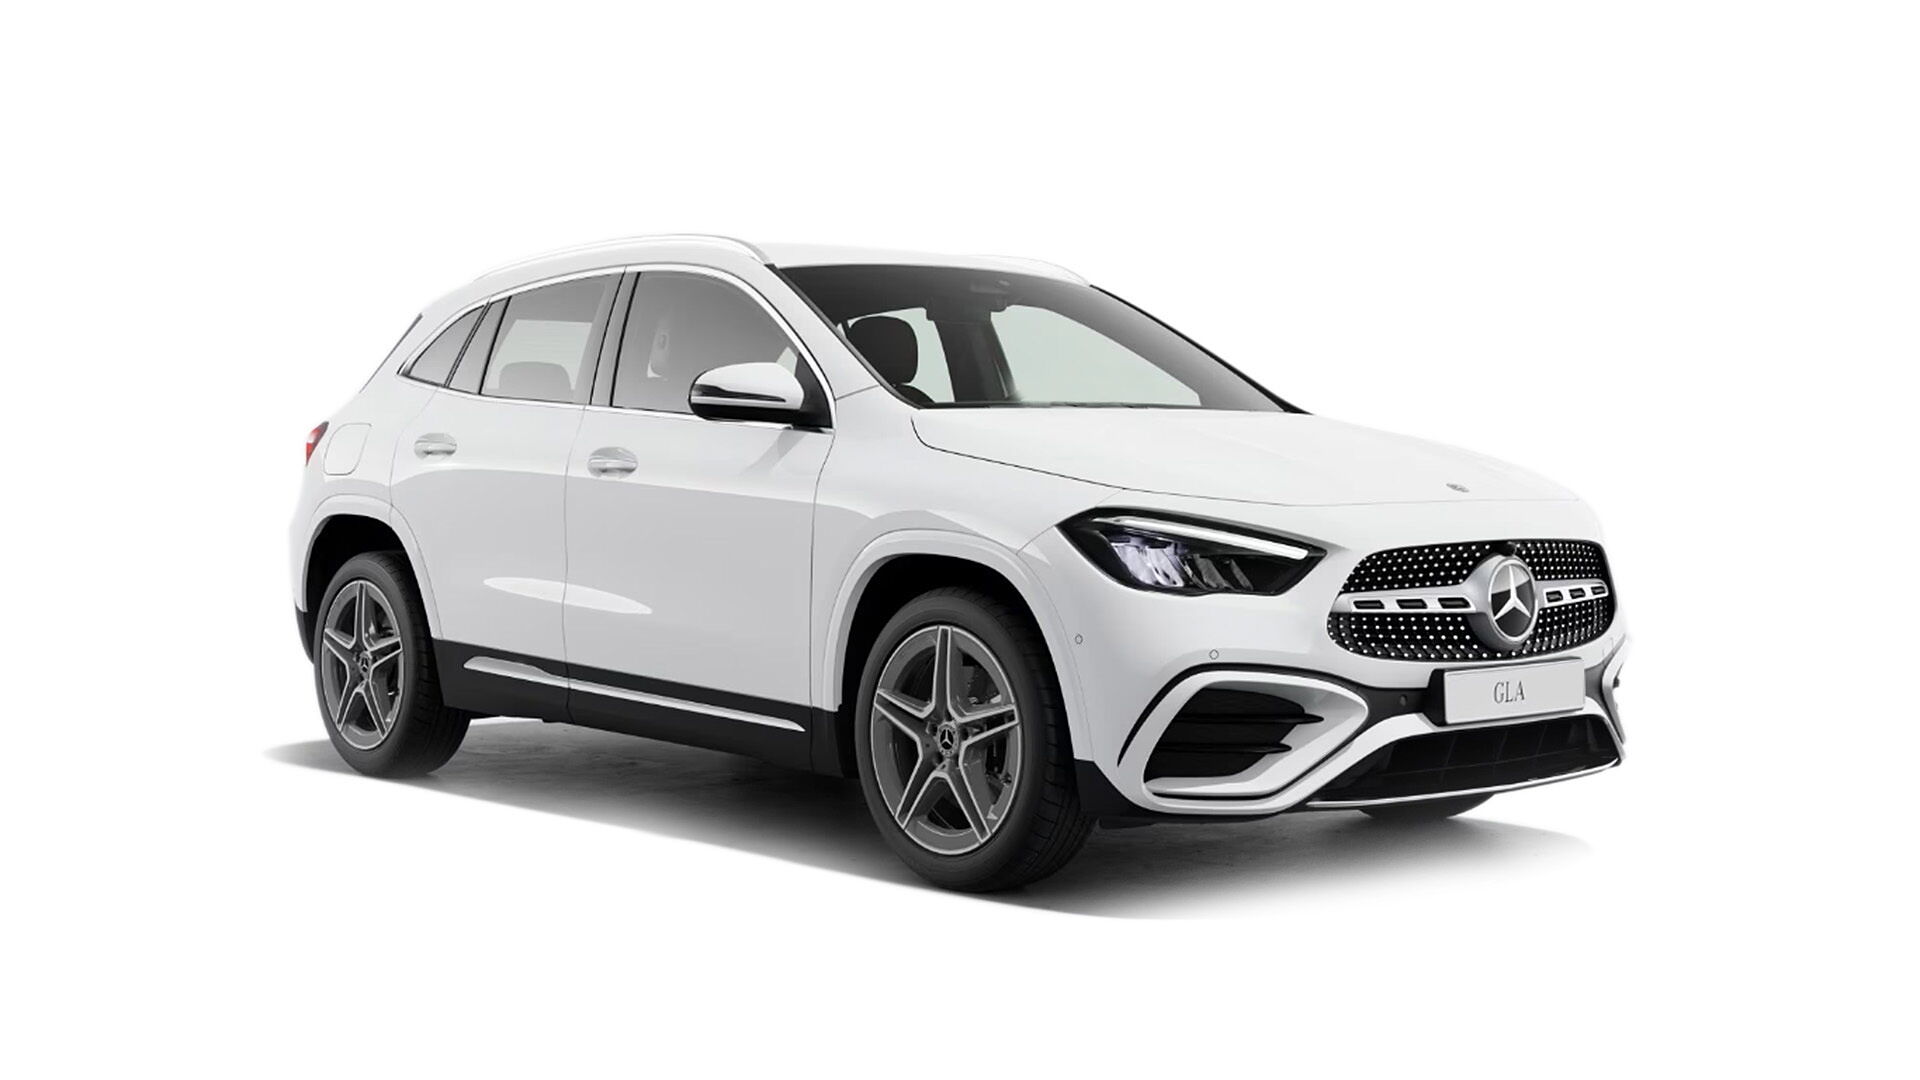 File:2018 Mercedes-Benz GLA 220 AMG Line Exclusive Diesel 4MATIC 2.1  Front.jpg - Wikipedia